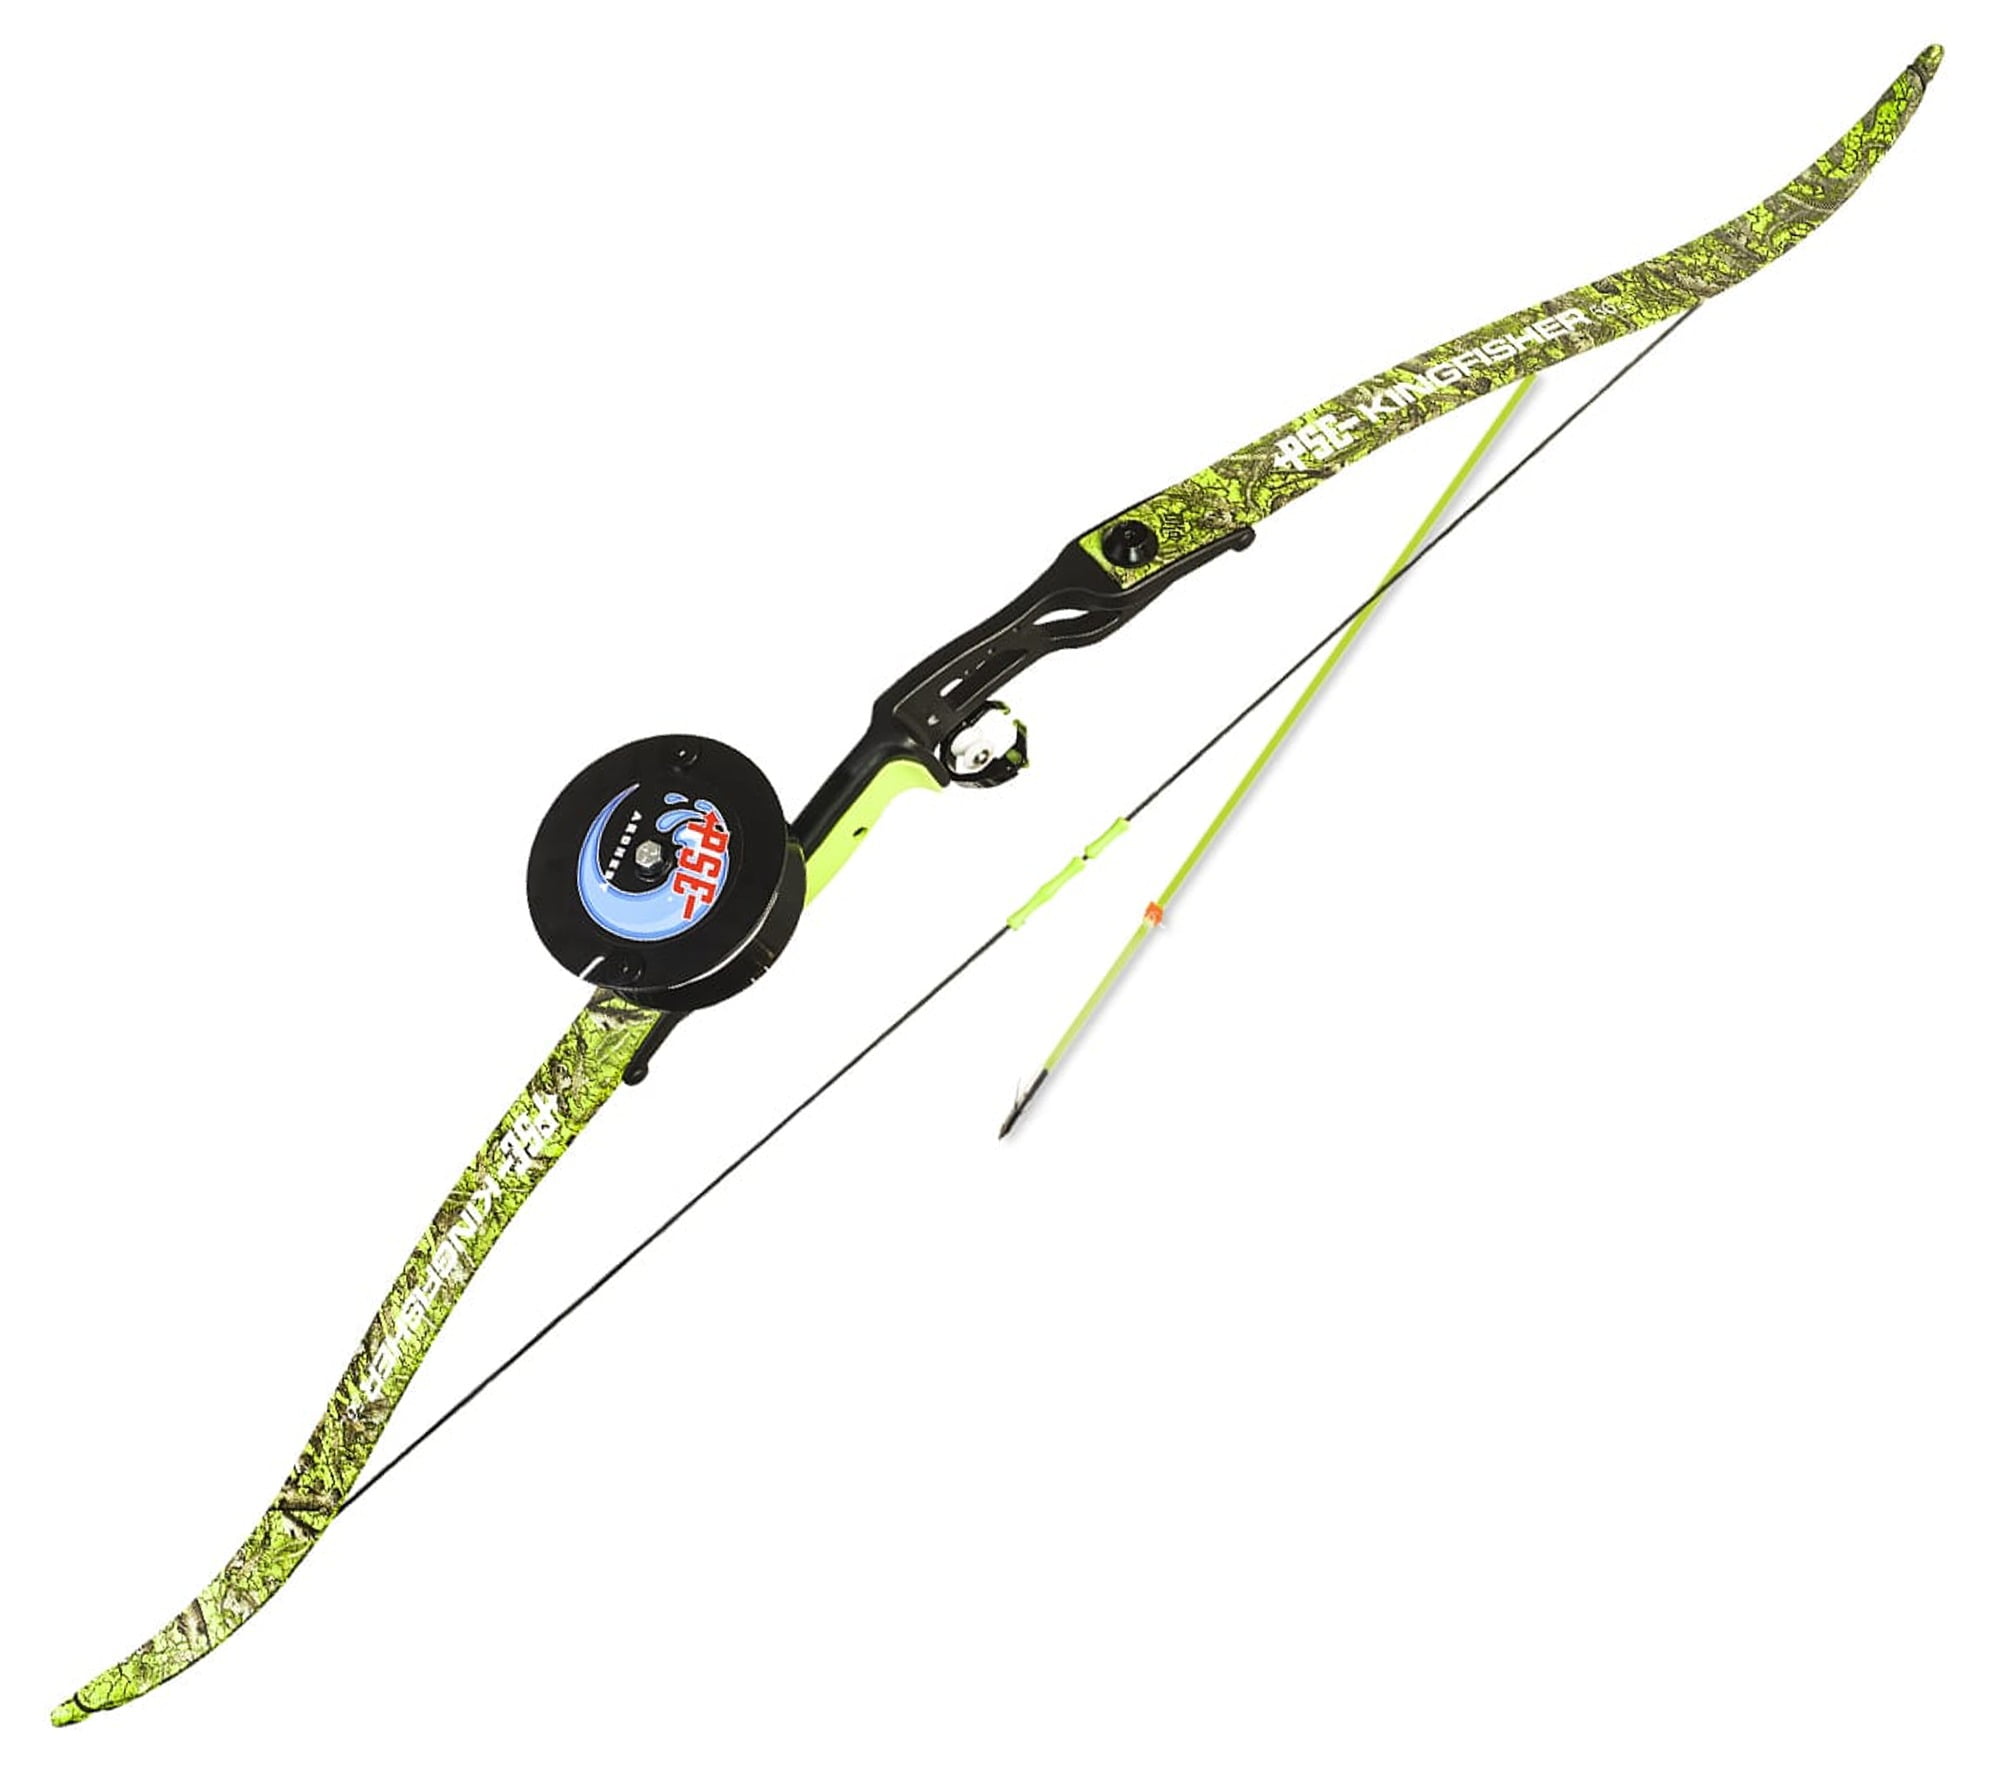 PSE Kingfisher Right Hand 60 inch 45 lb Bowfishing Recurve Bow 0884RAS6045 